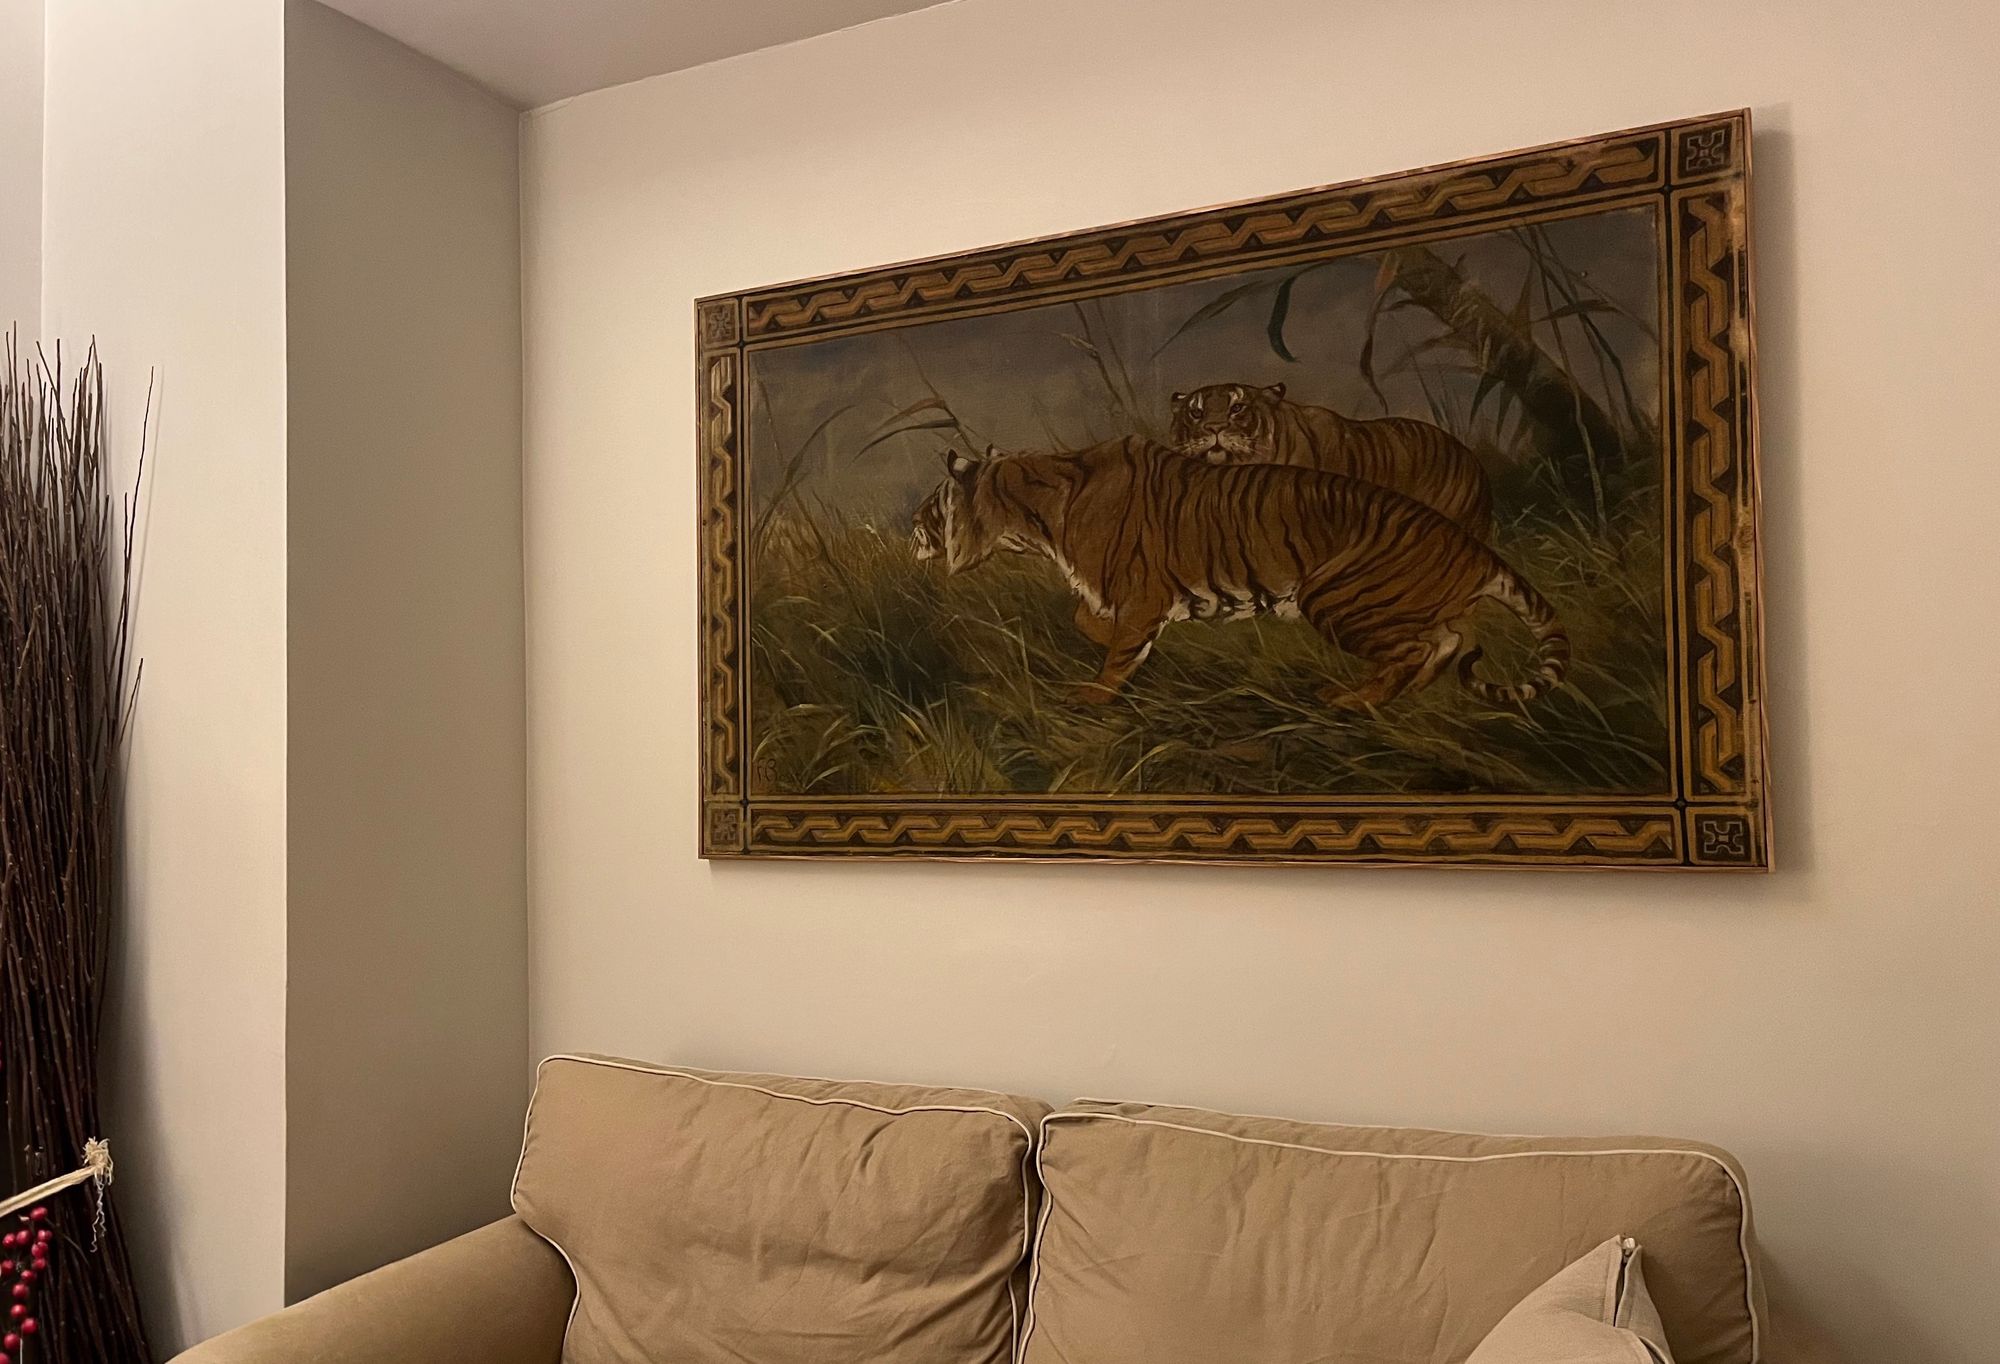 The side of a room, at the bottom there's a sofa, above it a large painting. It shows two tigers in the grass, with a painted frame.